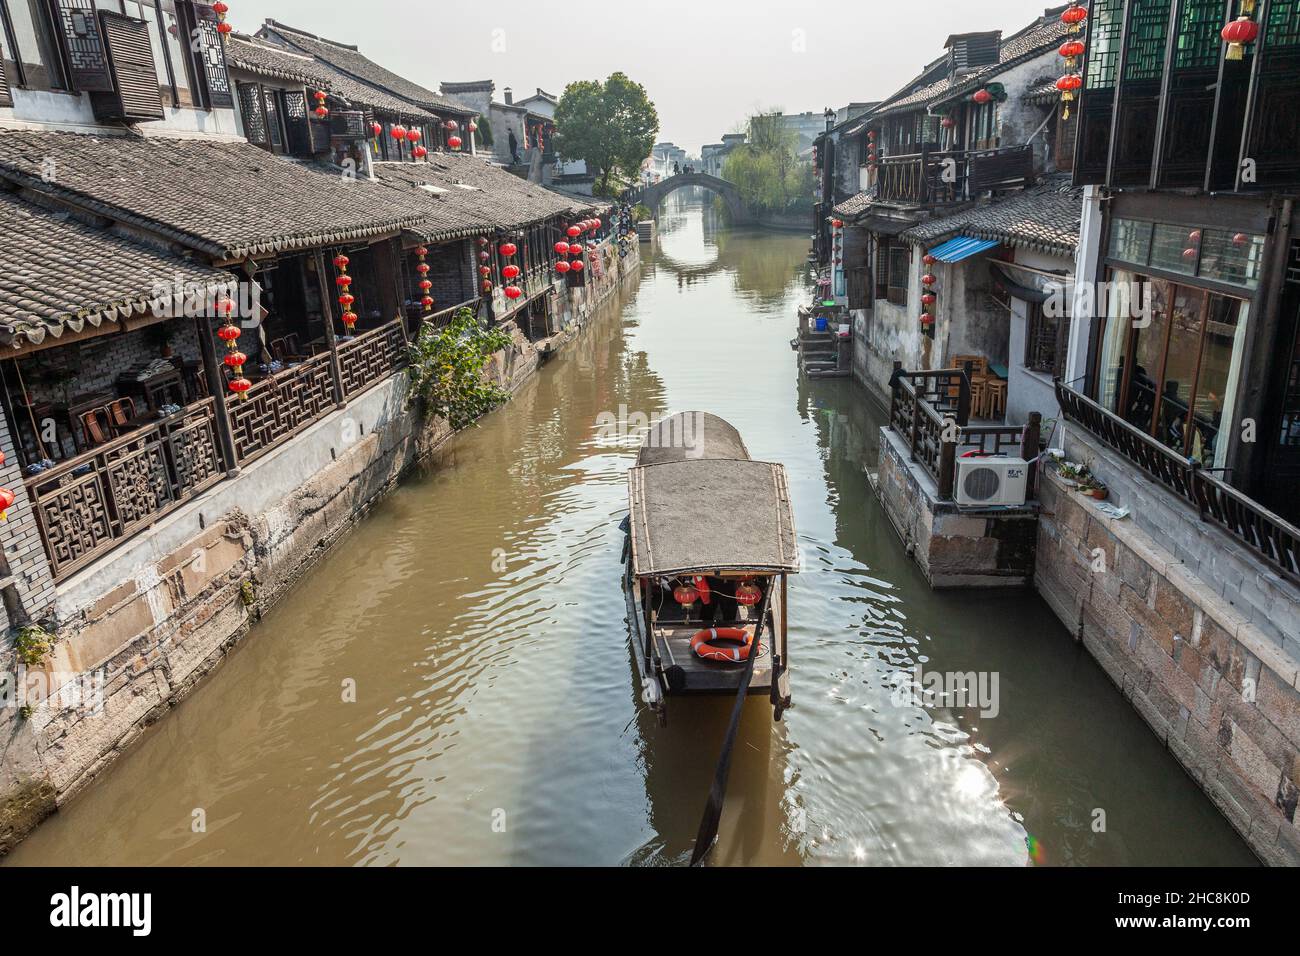 Boat on excursion on the canals of the water village of Xitang, China Stock Photo